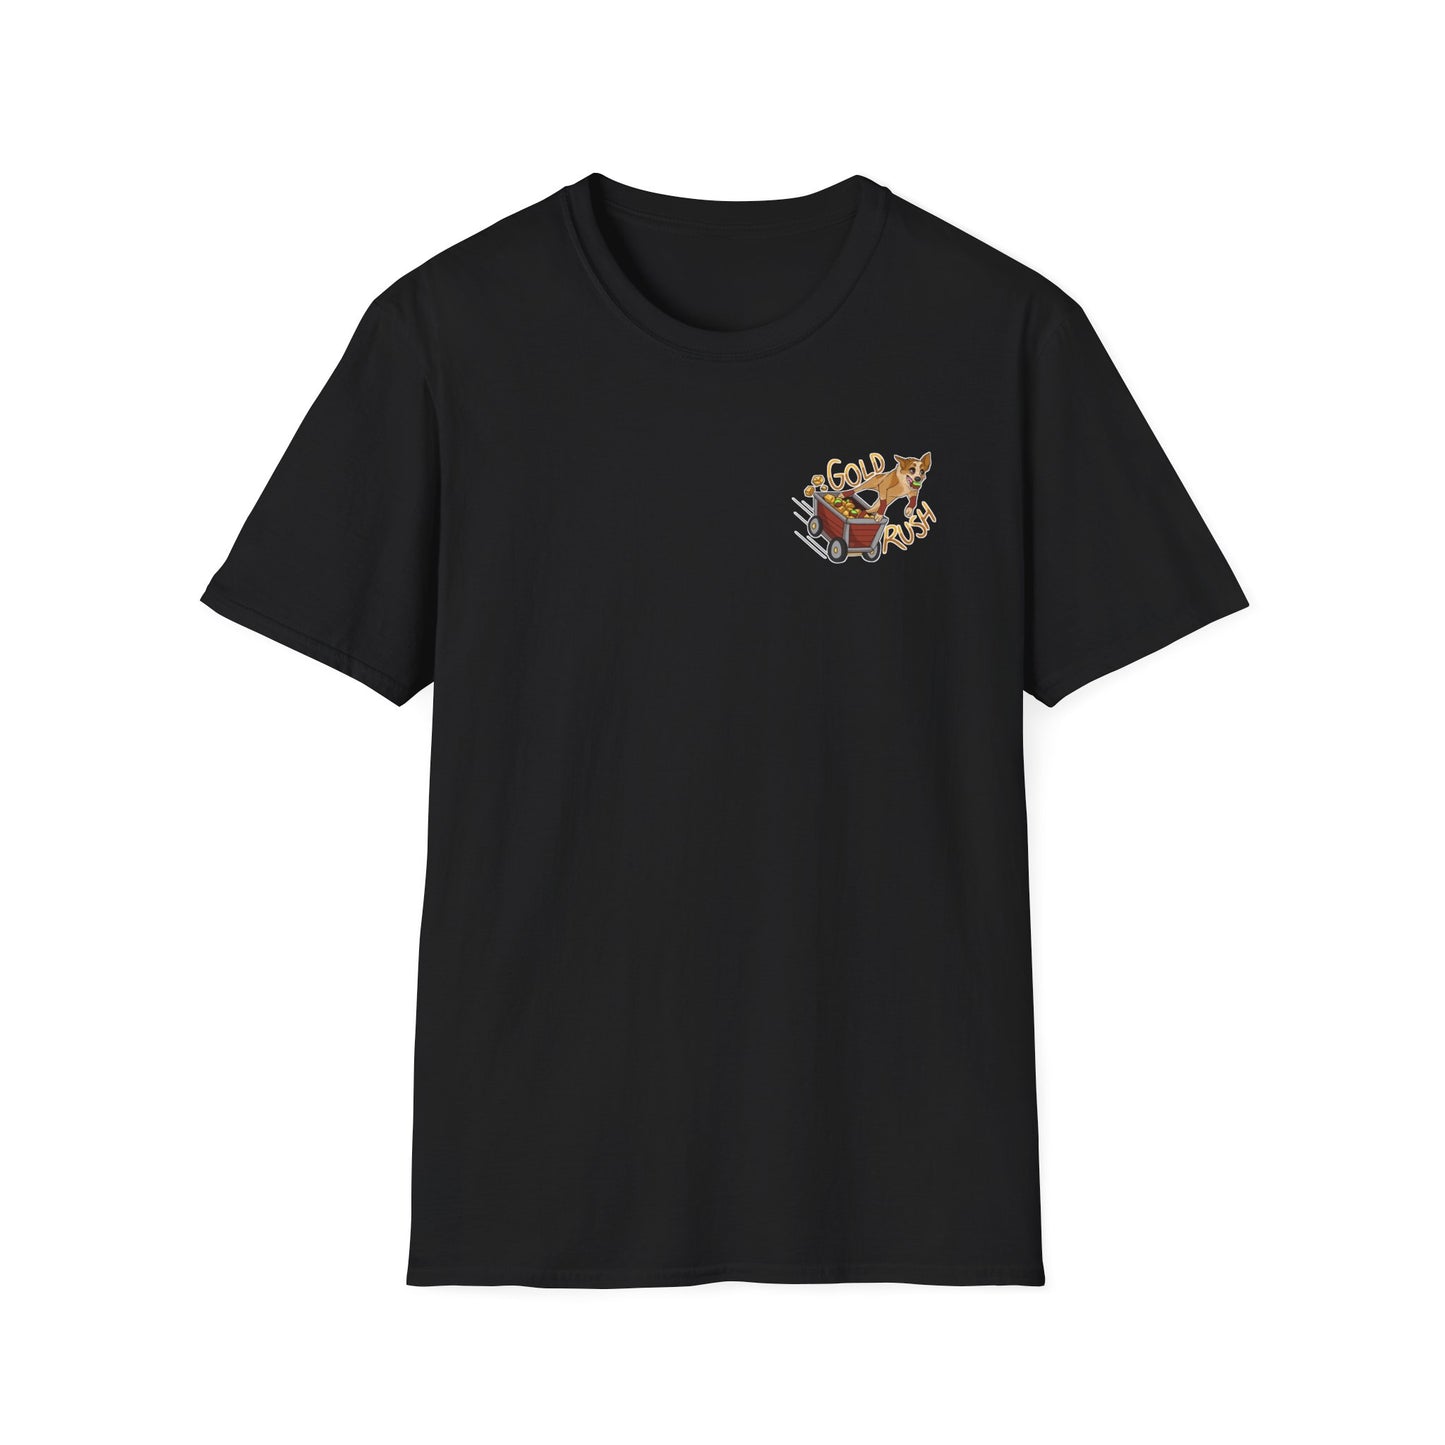 GOLD RUSH FLYBALL Unisex Softstyle T-Shirt